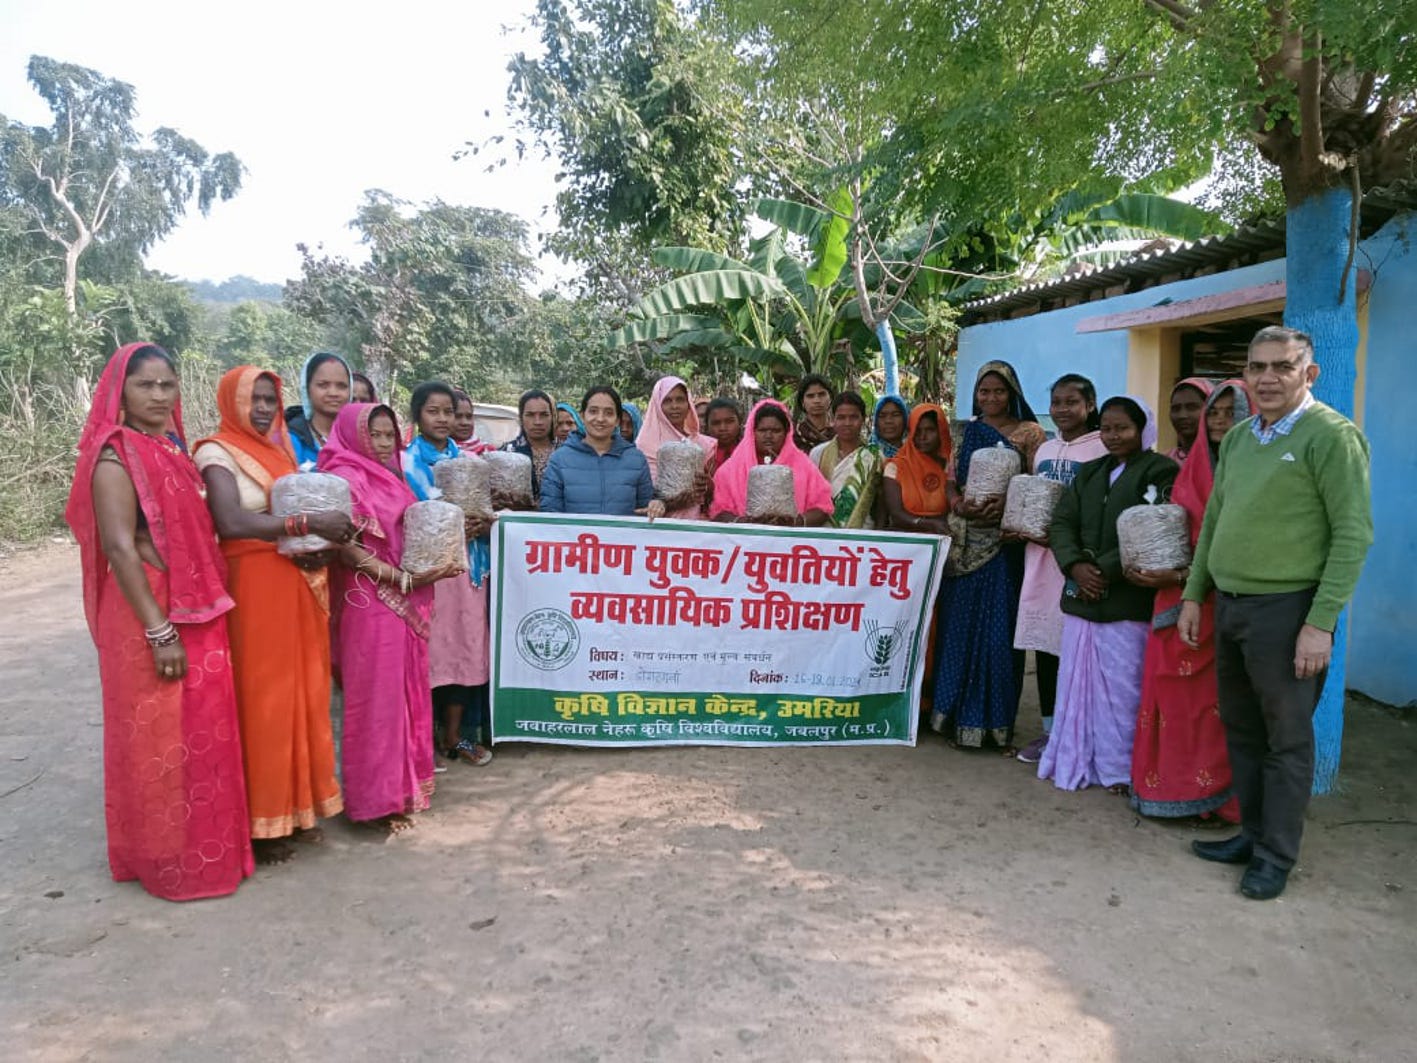 Training given to women in making products from mushroom and amla